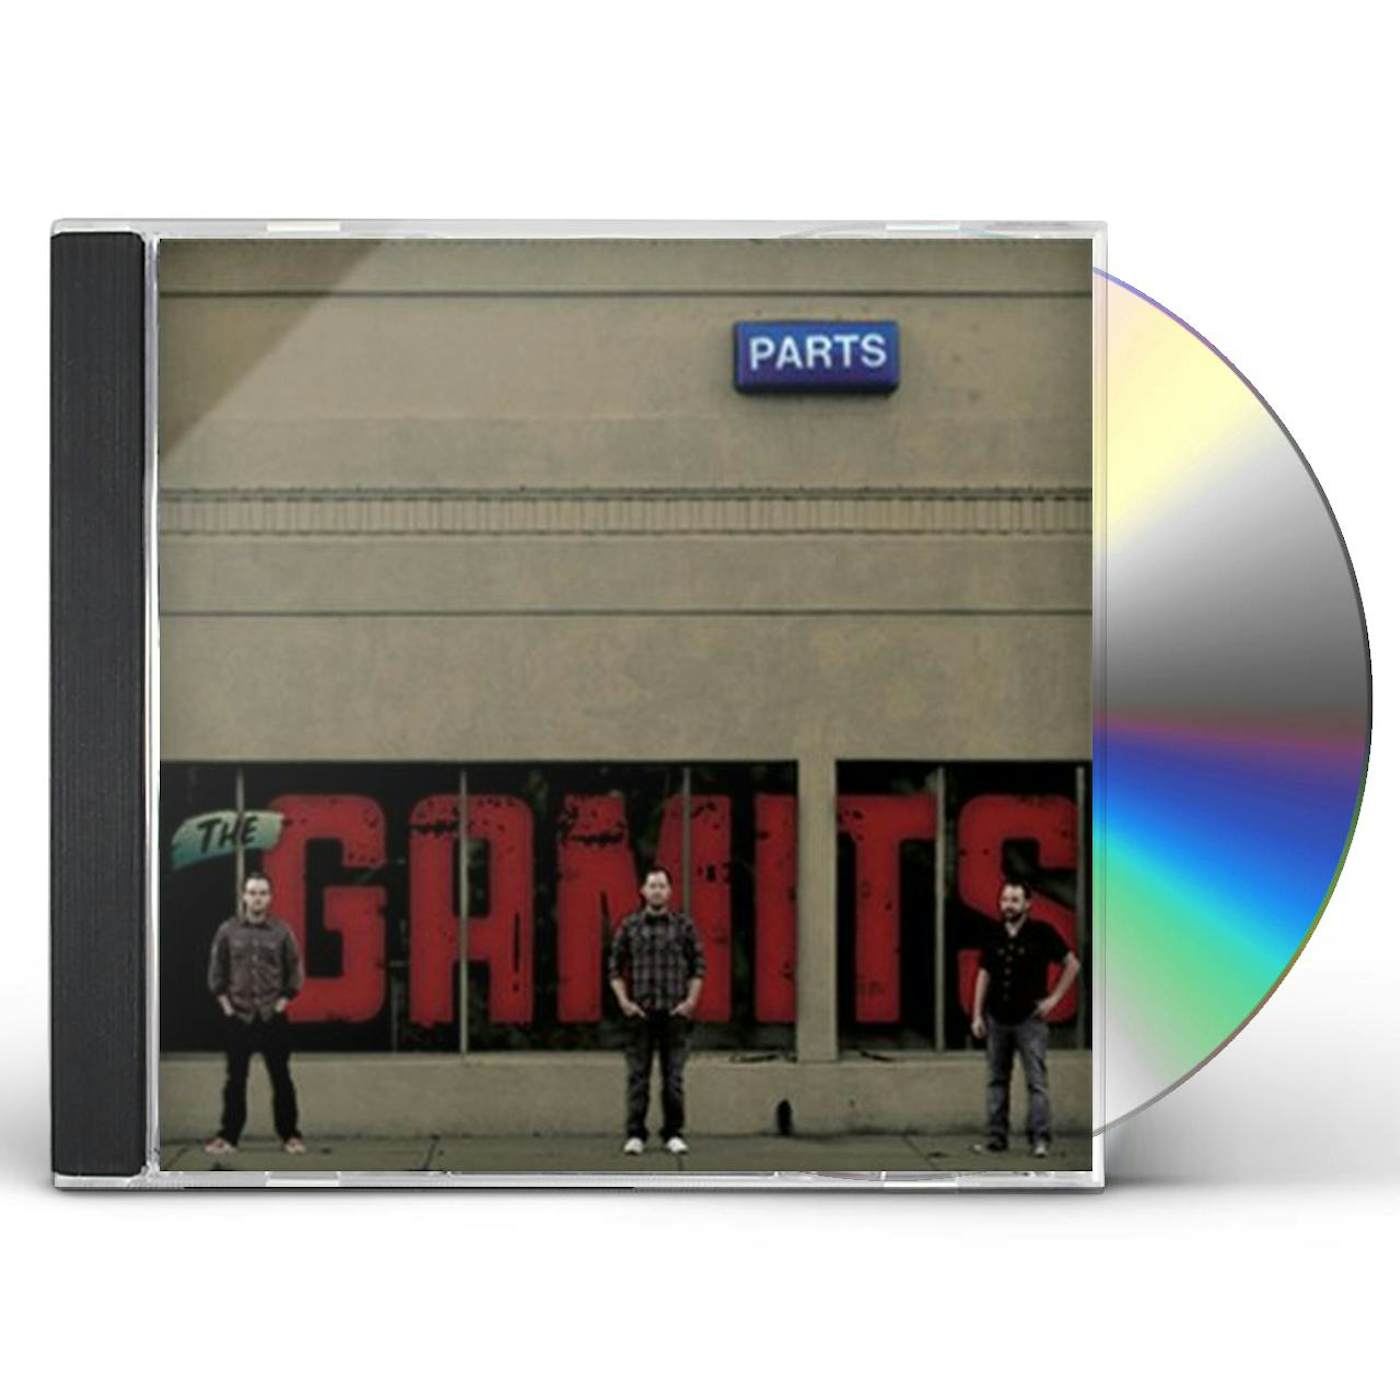 The Gamits PARTS CD